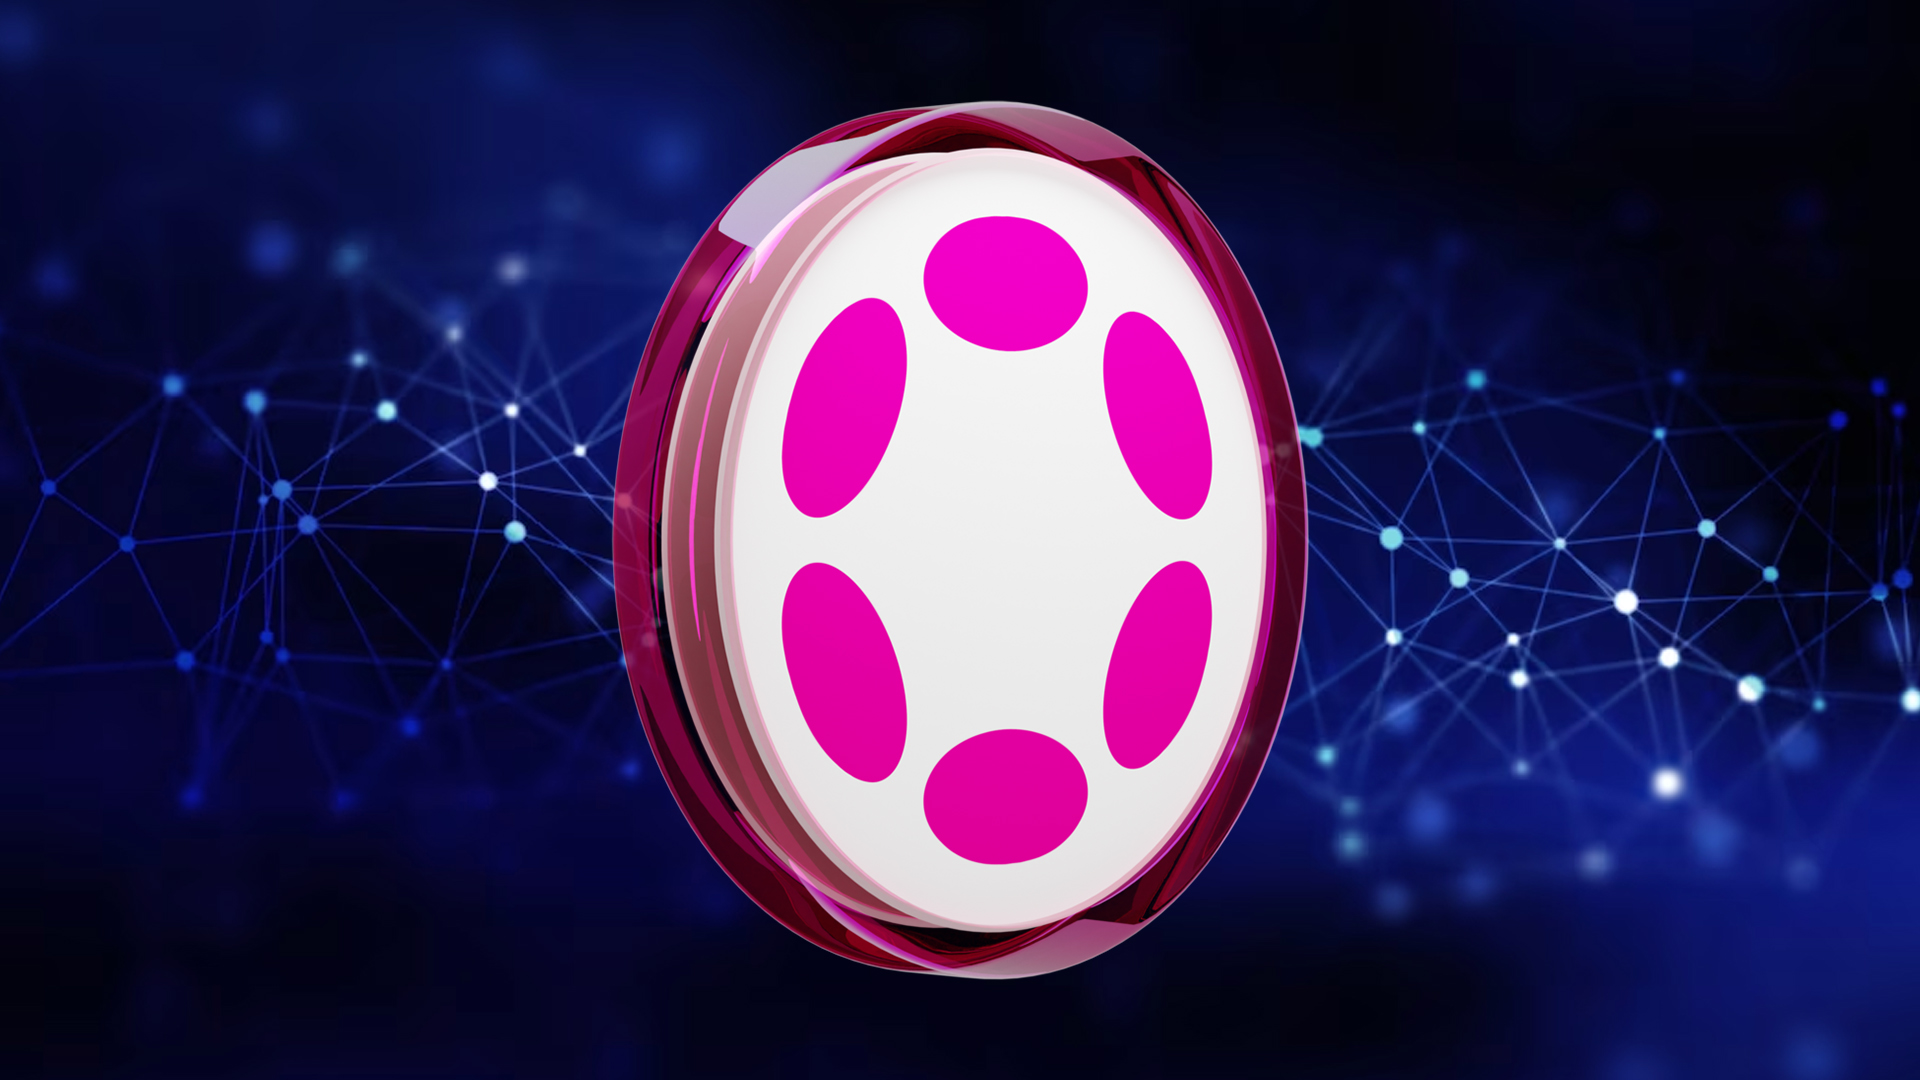 Top 5 Polkadot Ecosystem Coins Have Potential for Massive Growth